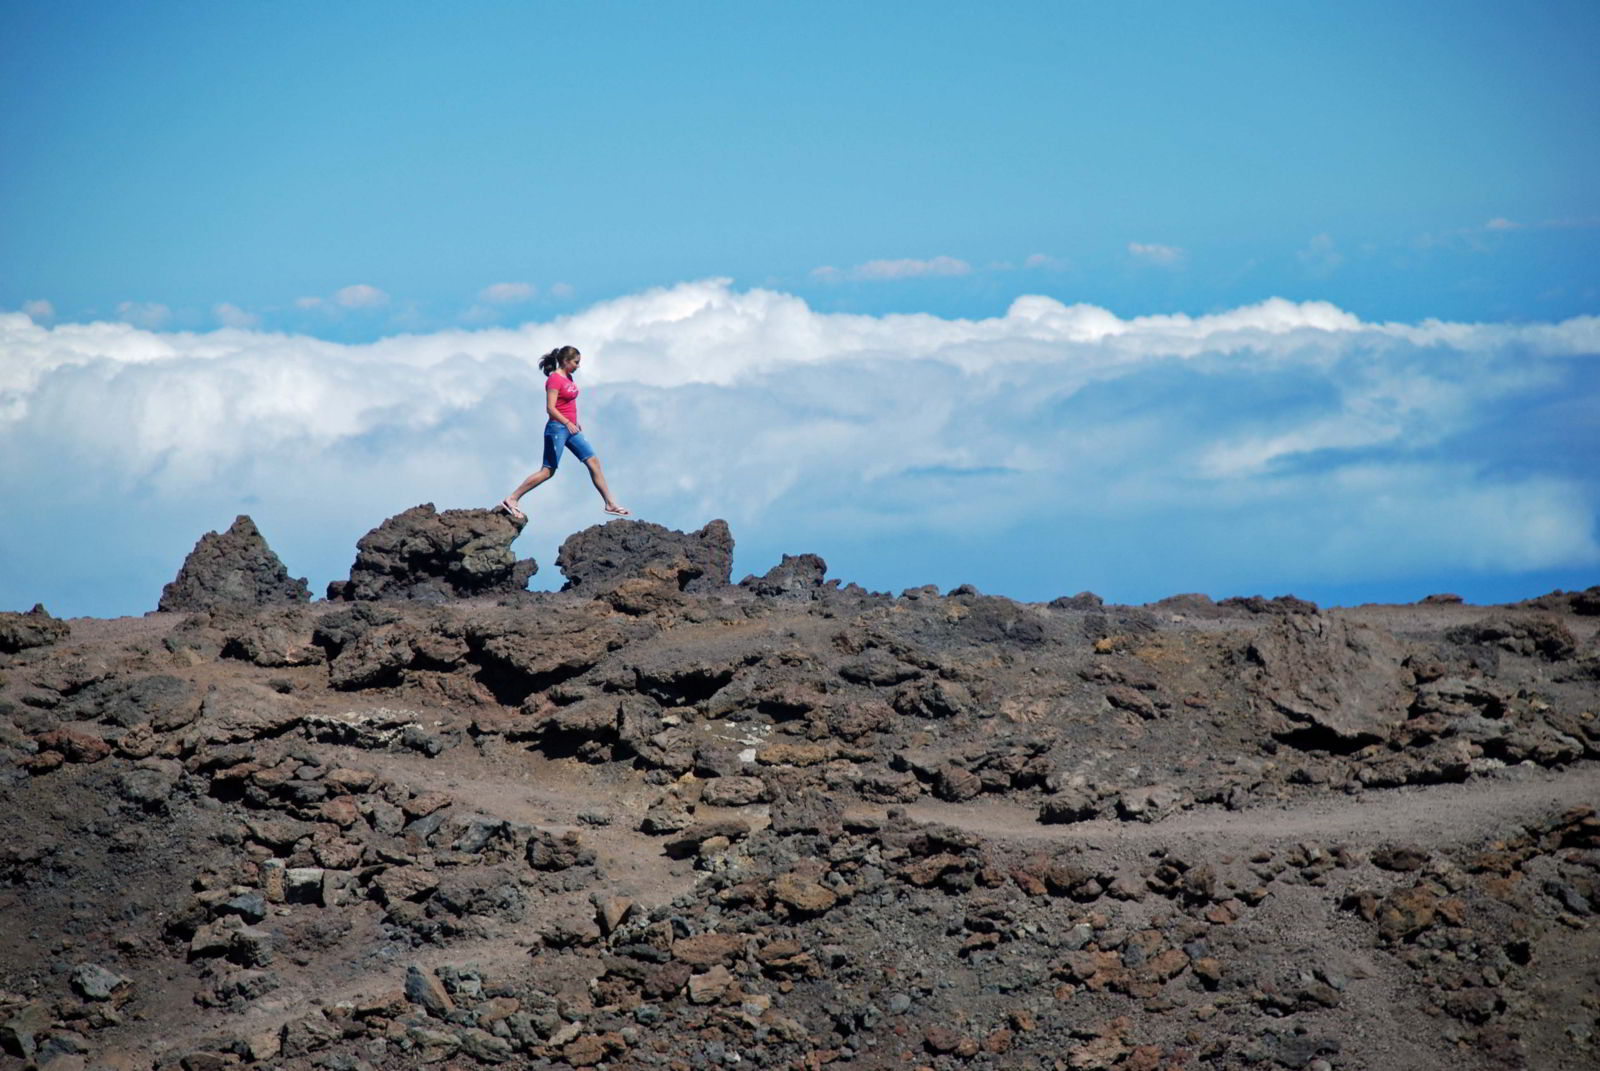 An image of a hiker jumping from one rock to the next with clouds behind them on Haleakala on the island of Maui, Hawaii - Hiking Maui